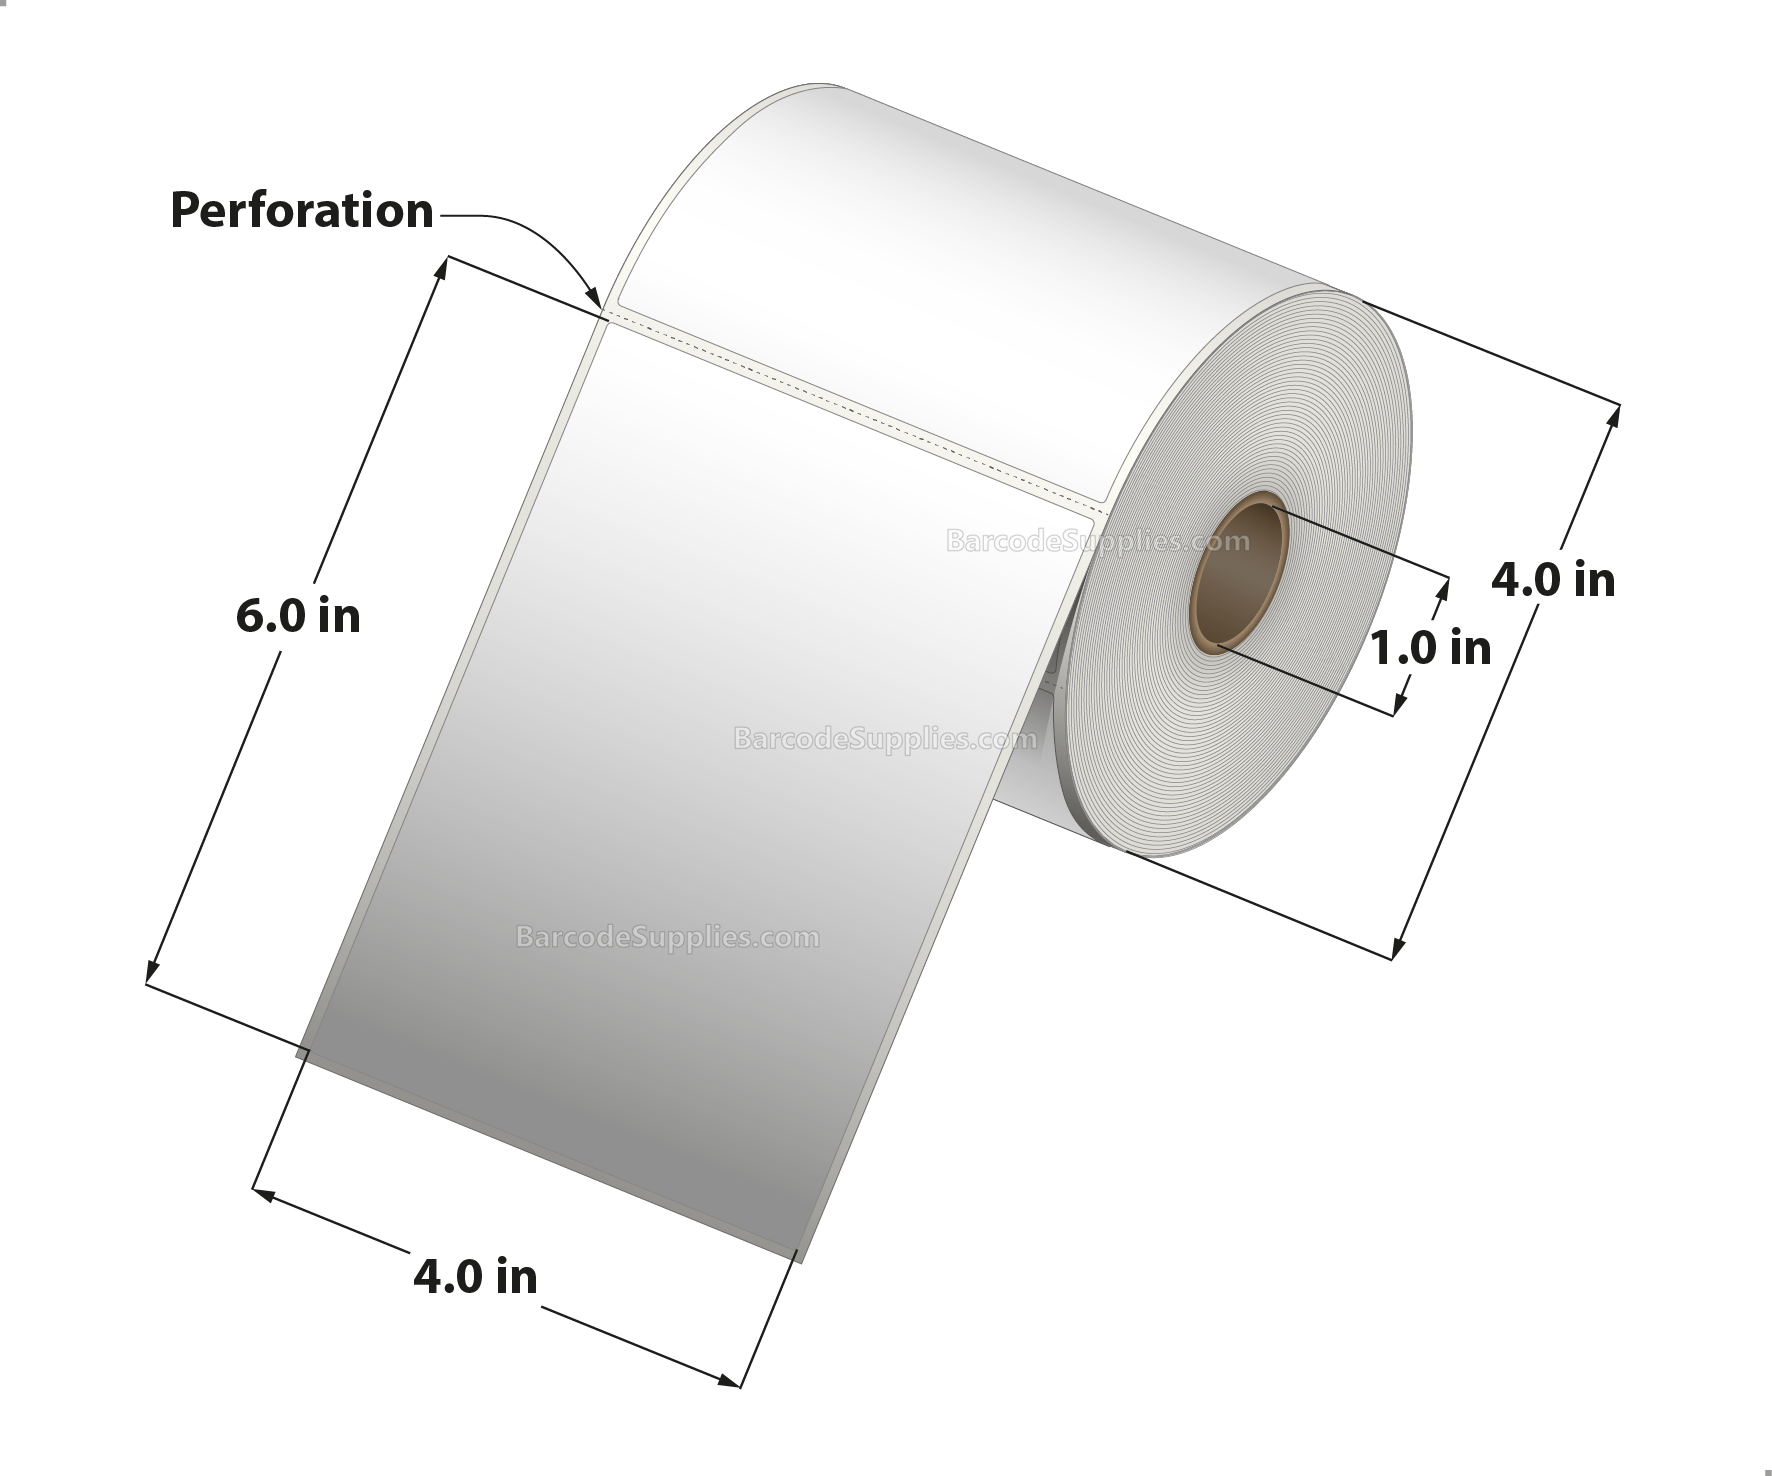 4 x 6 Thermal Transfer White Labels With Rubber Adhesive - Perforated - 250 Labels Per Roll - Carton Of 12 Rolls - 3000 Labels Total - MPN: RTT4-400600-1P